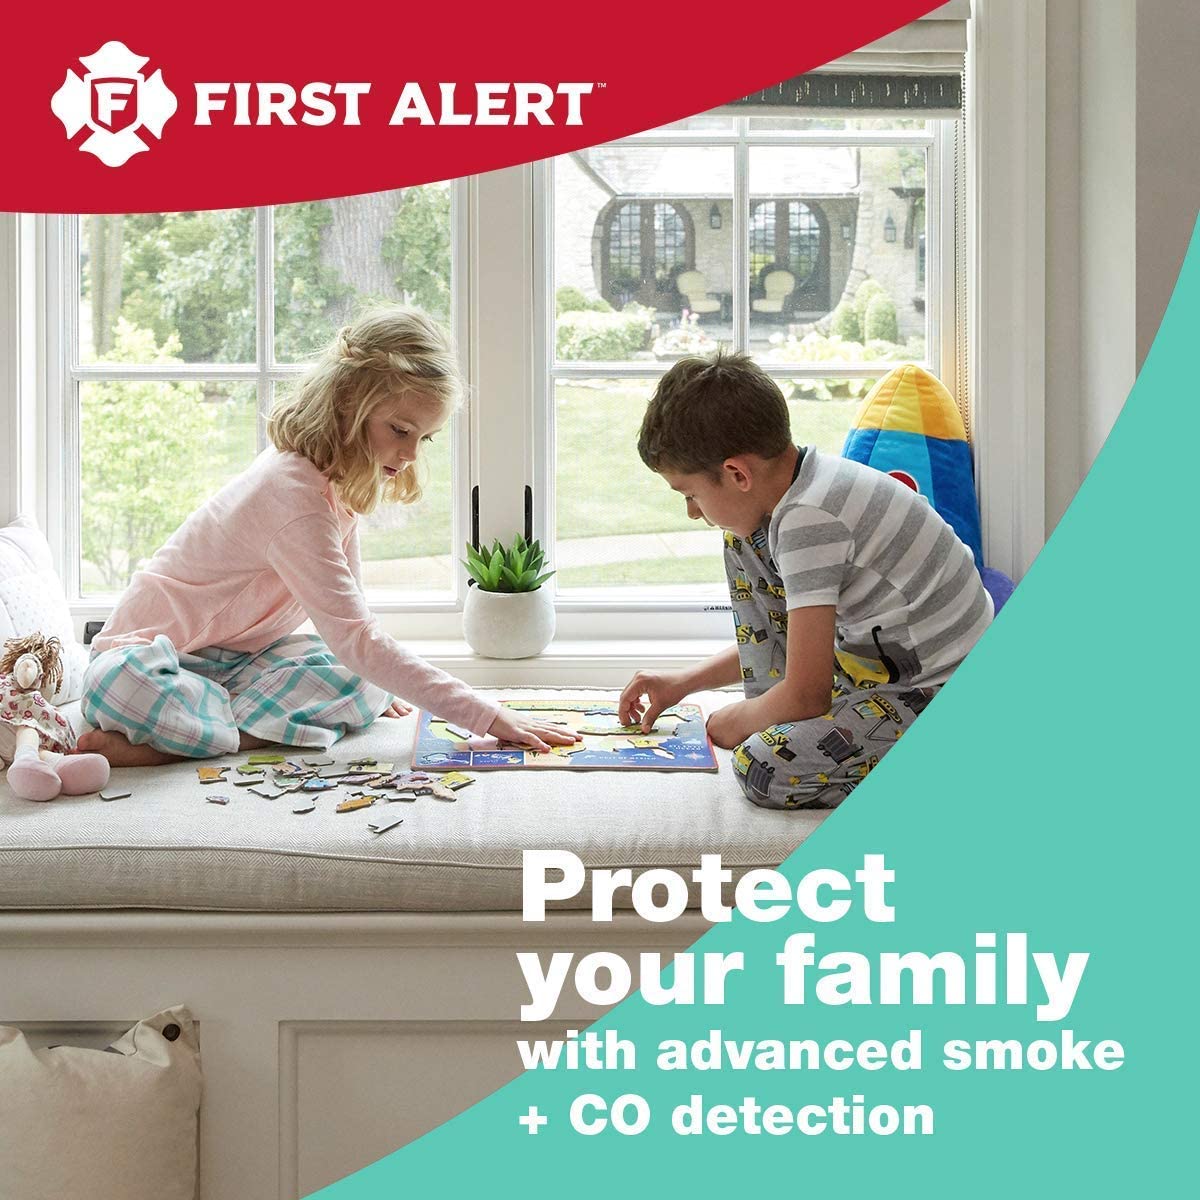 First Alert SCO5RVA Battery Operated Combination Carbon Monoxide and Smoke Alarm